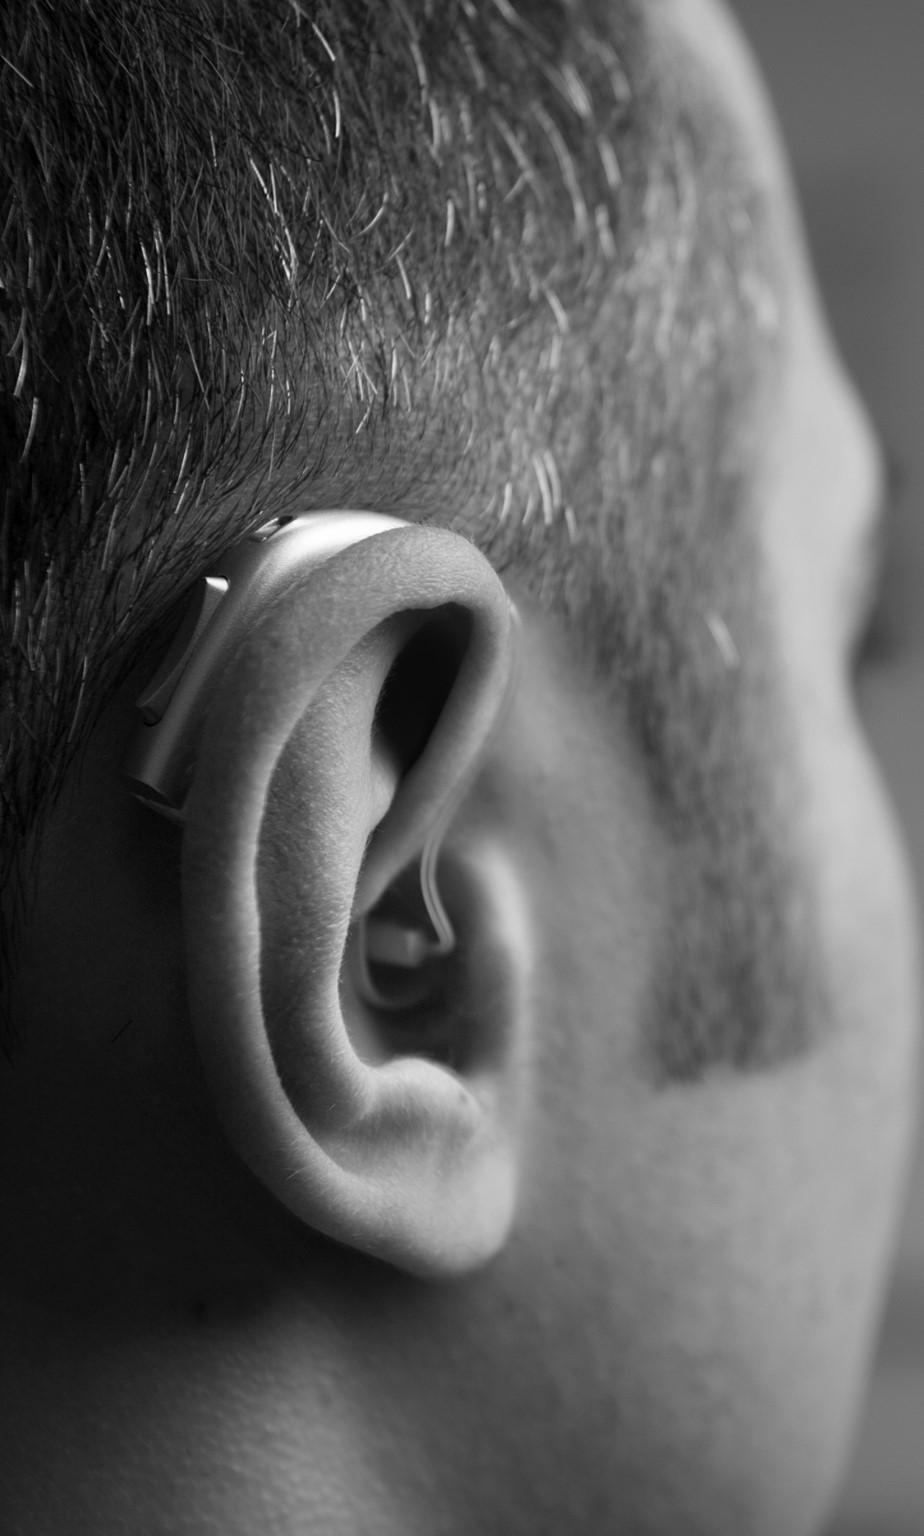 Why do hearing aids not solve the problem?